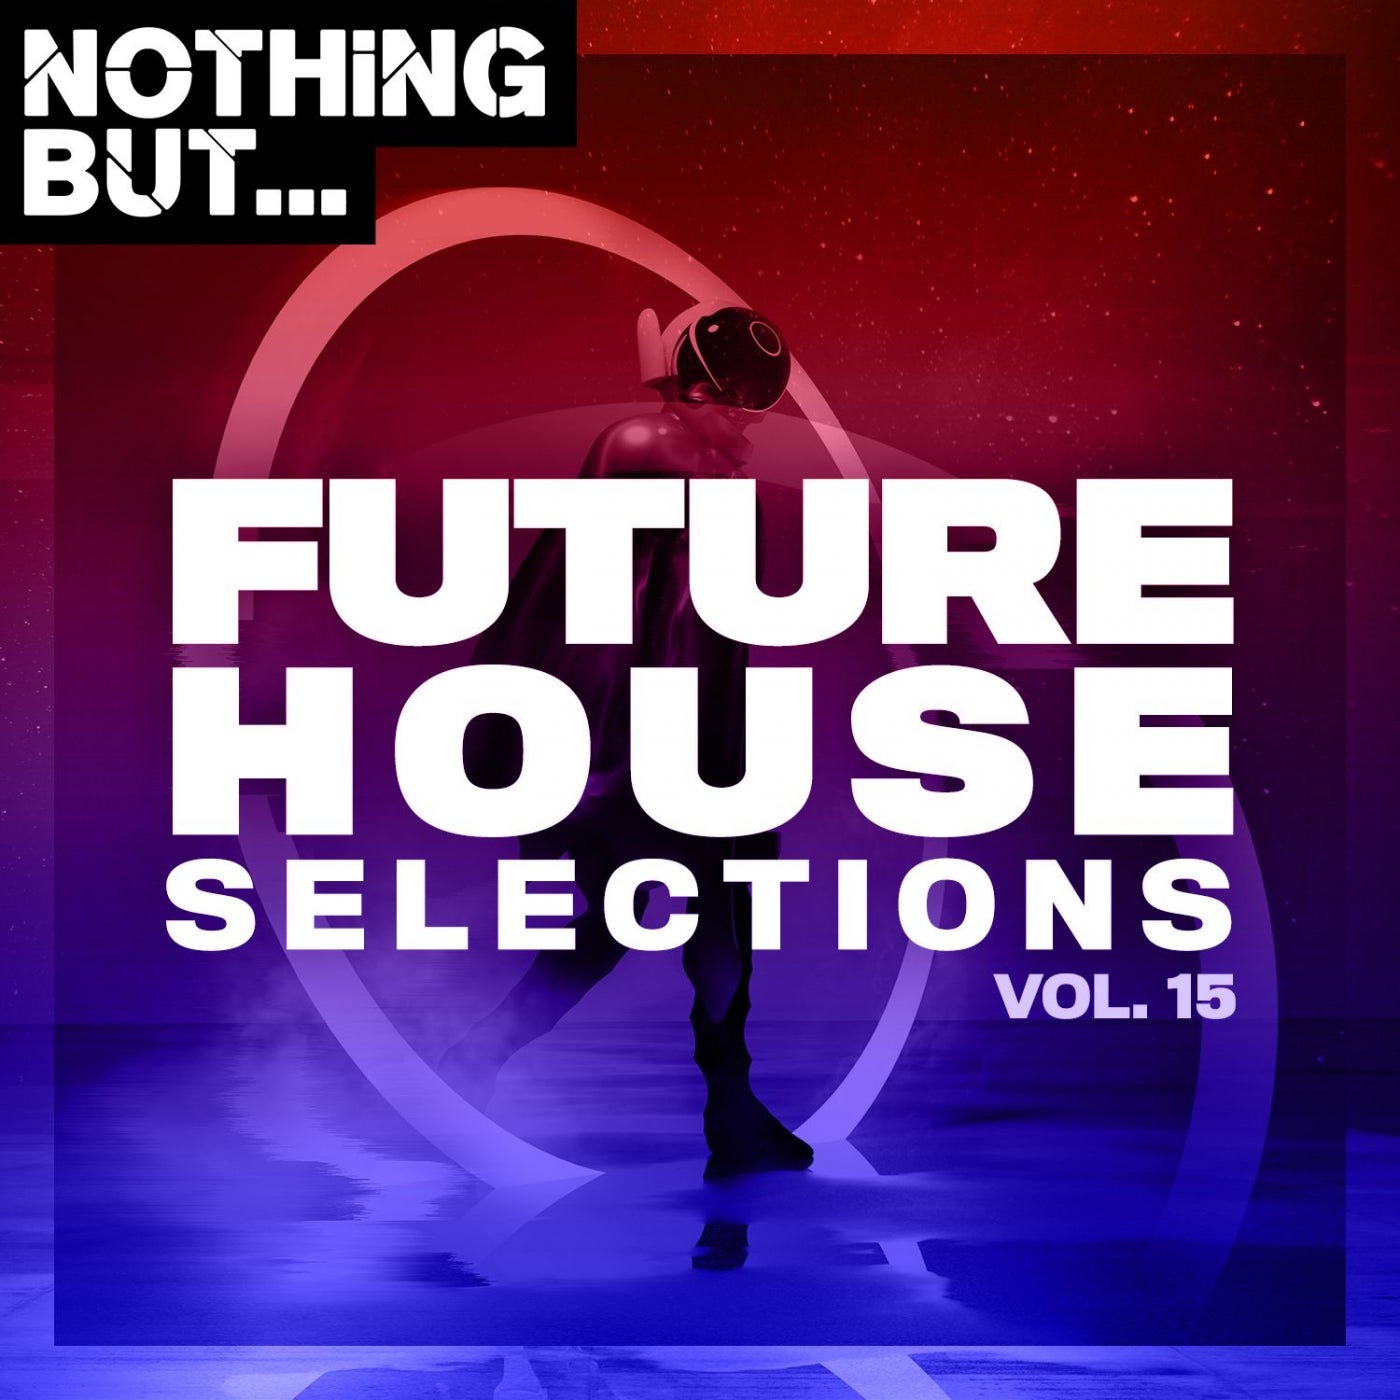 VA – Nothing But… Future House Selections, Vol. 15 [NBFHS15]